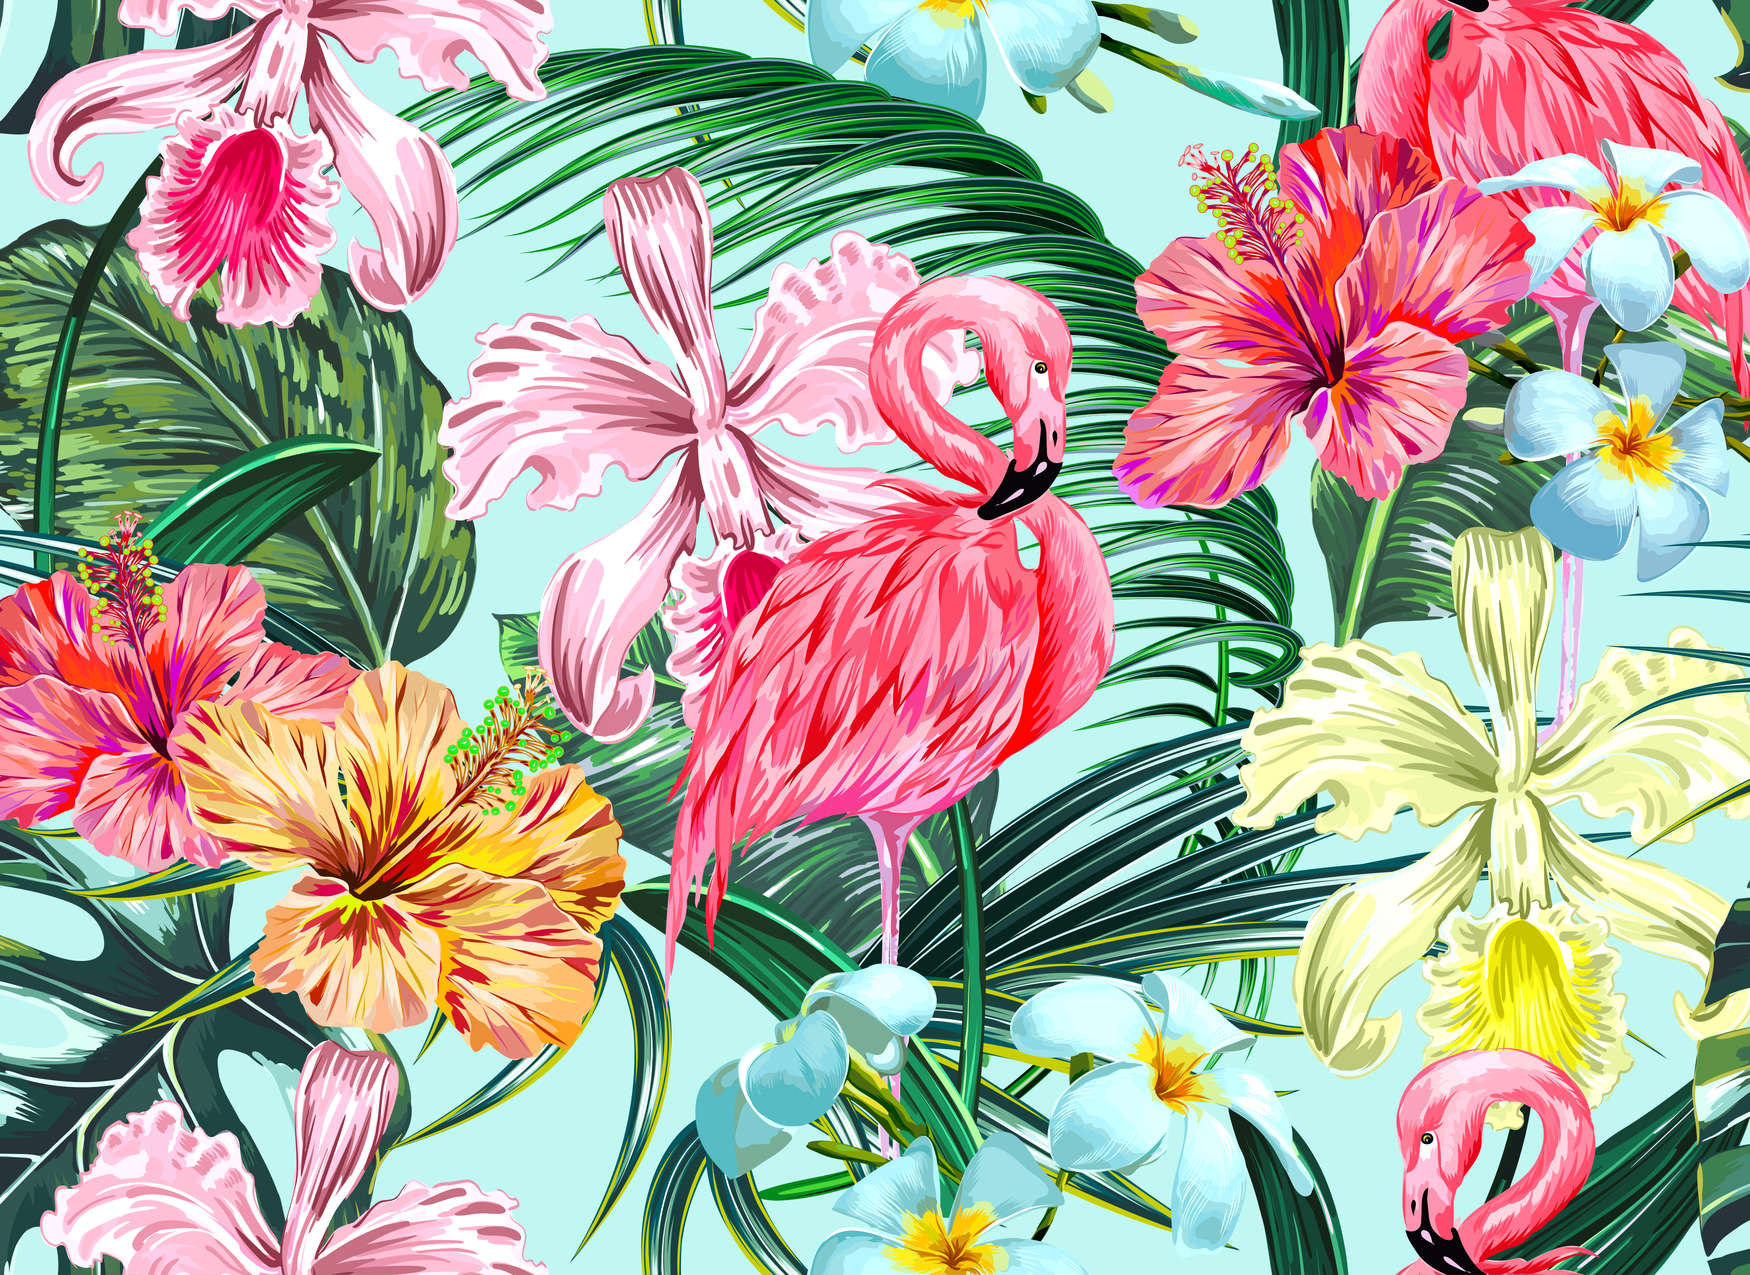             Tropical Wallpaper with Flamingo - Colourful, Blue, Green
        